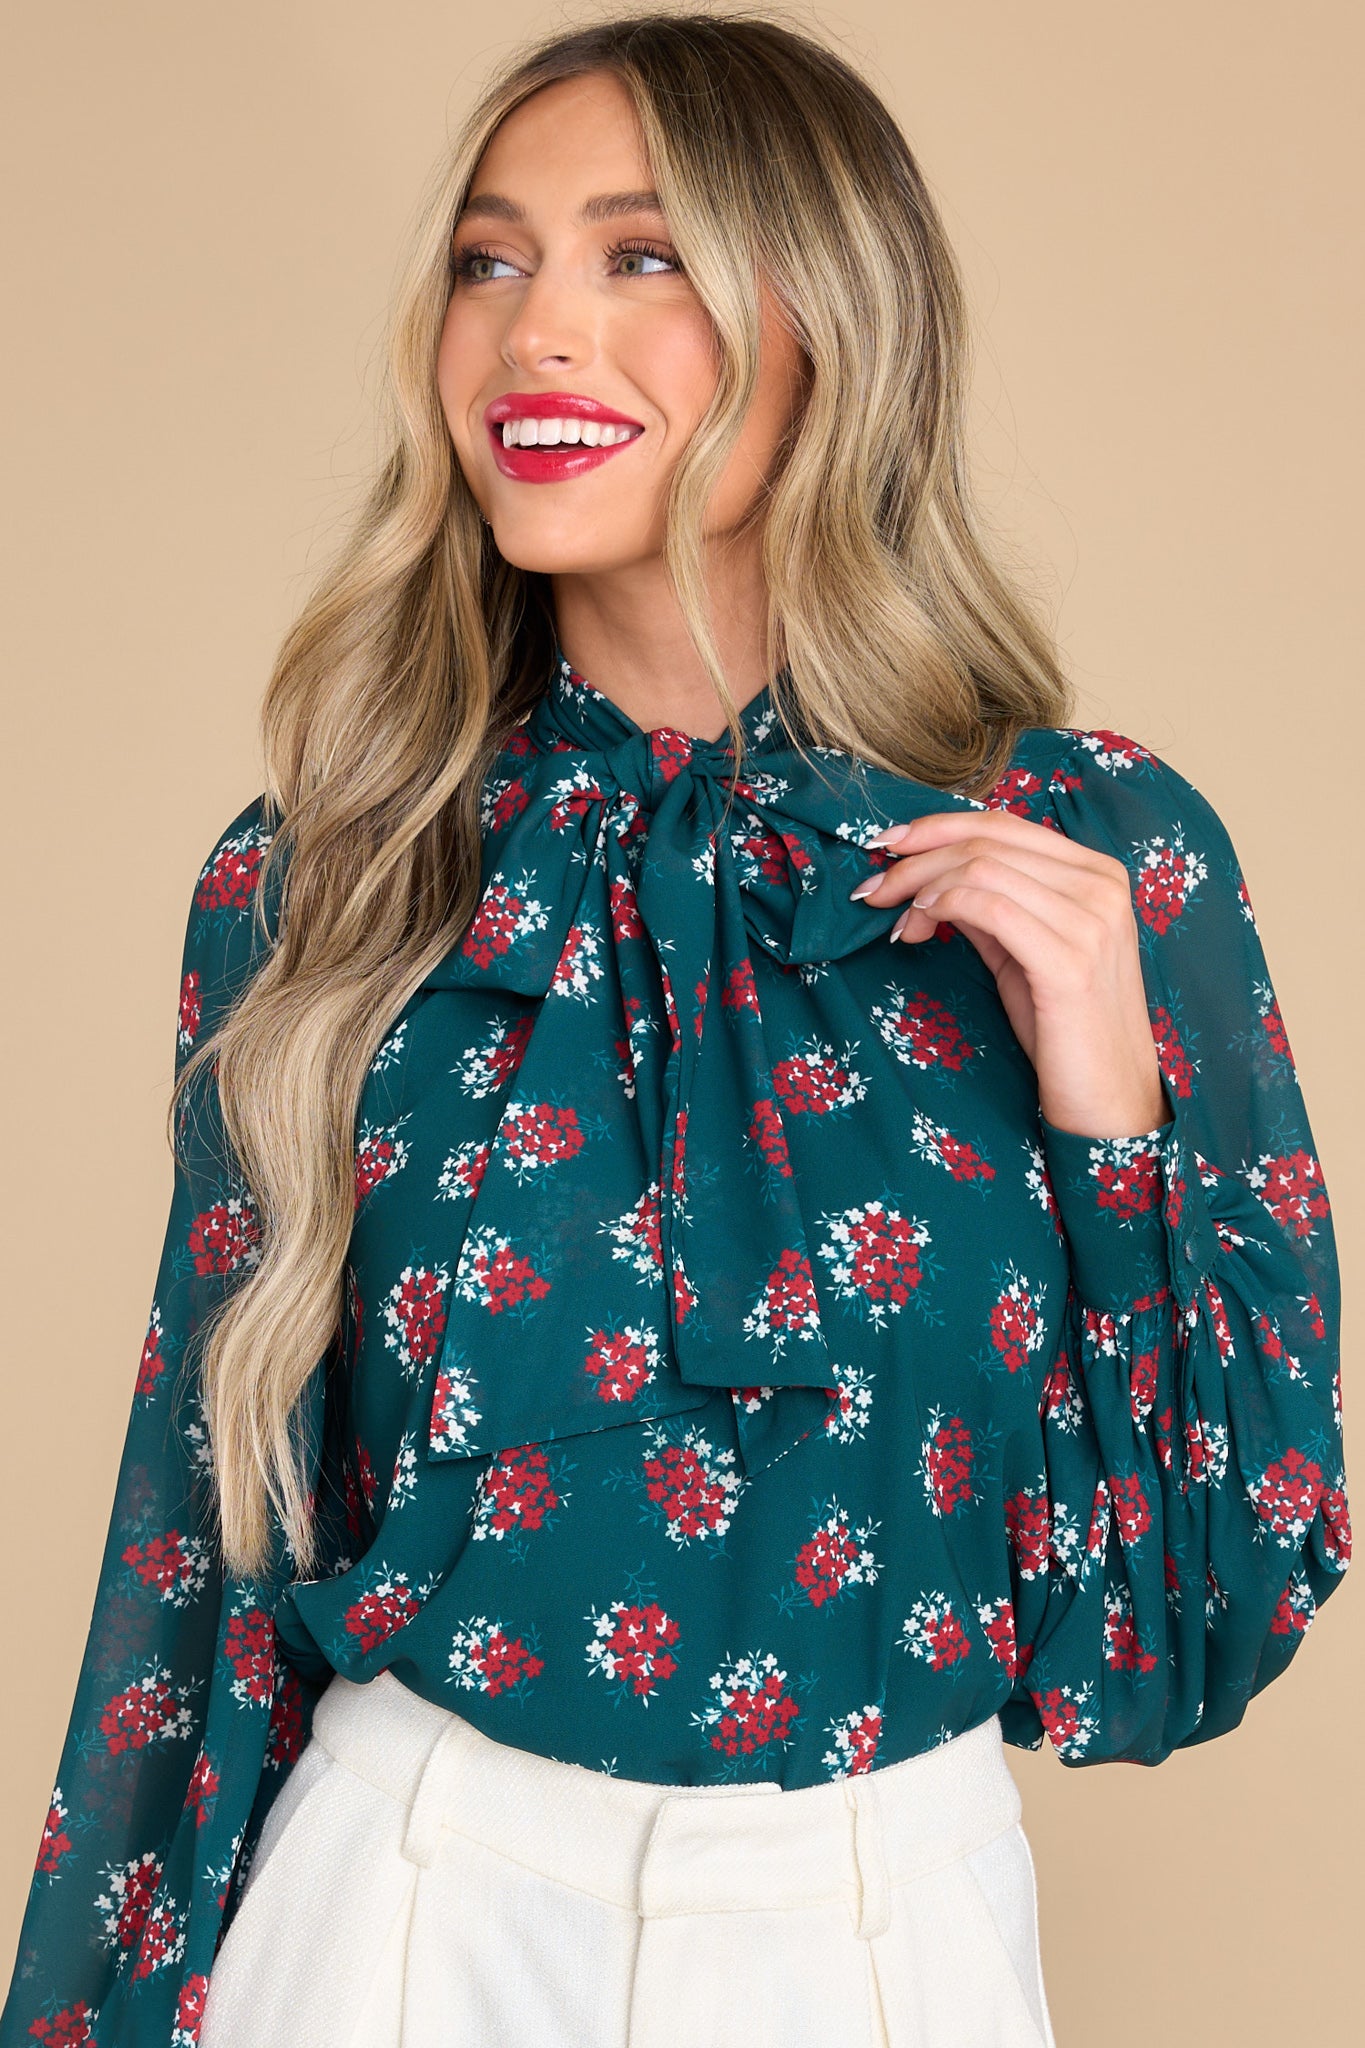 This emerald blouse features a high v-neckline, keyhole opening in the front, balloon sleeves and buttoned cuffs.